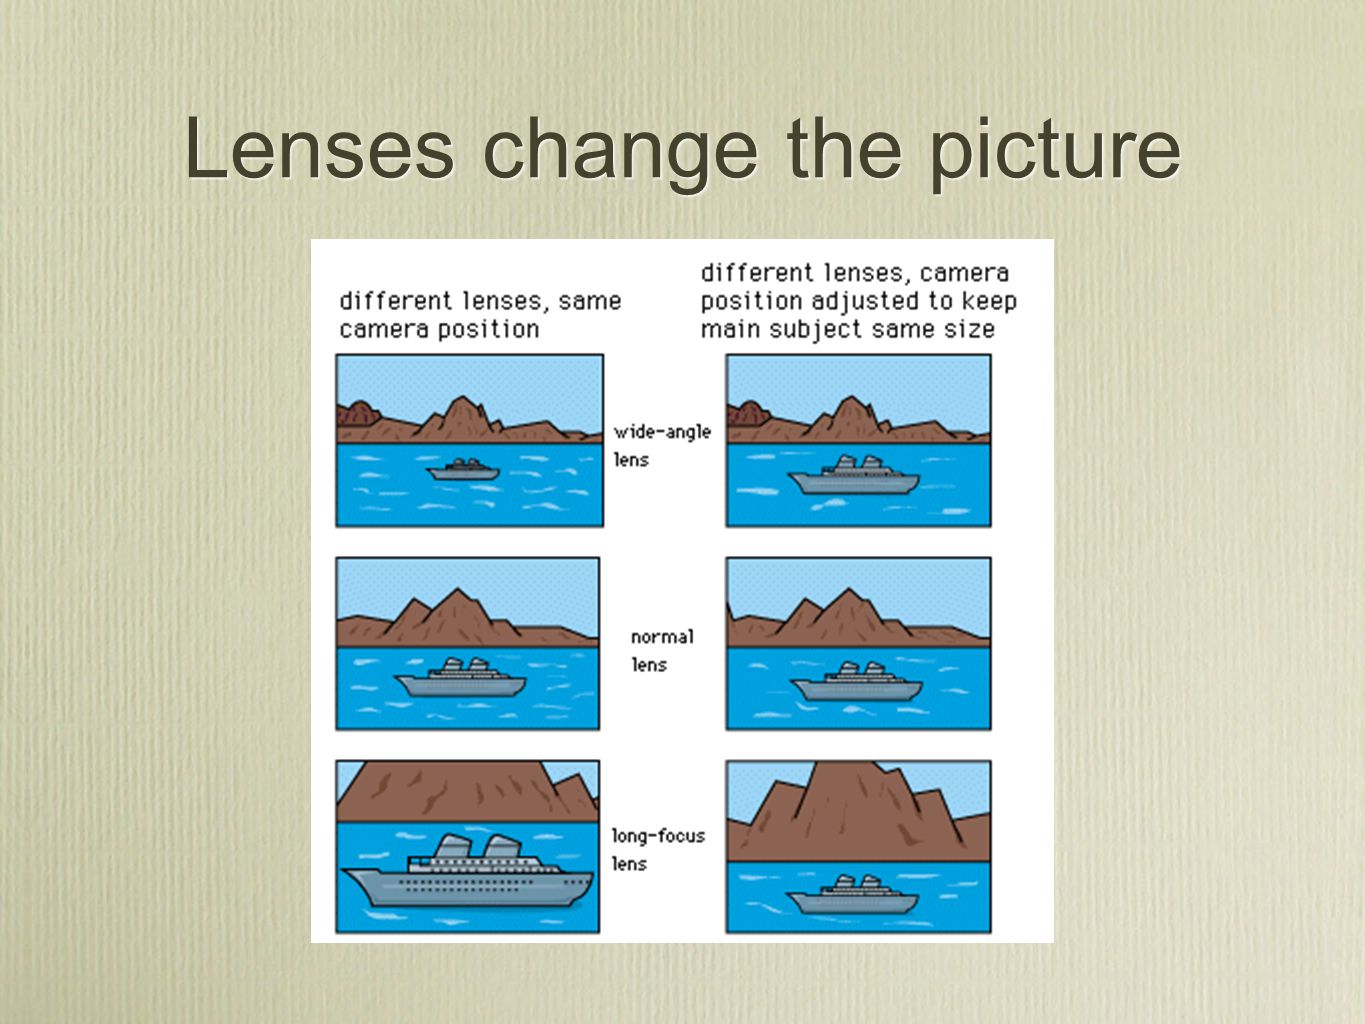 Lenses change the picture